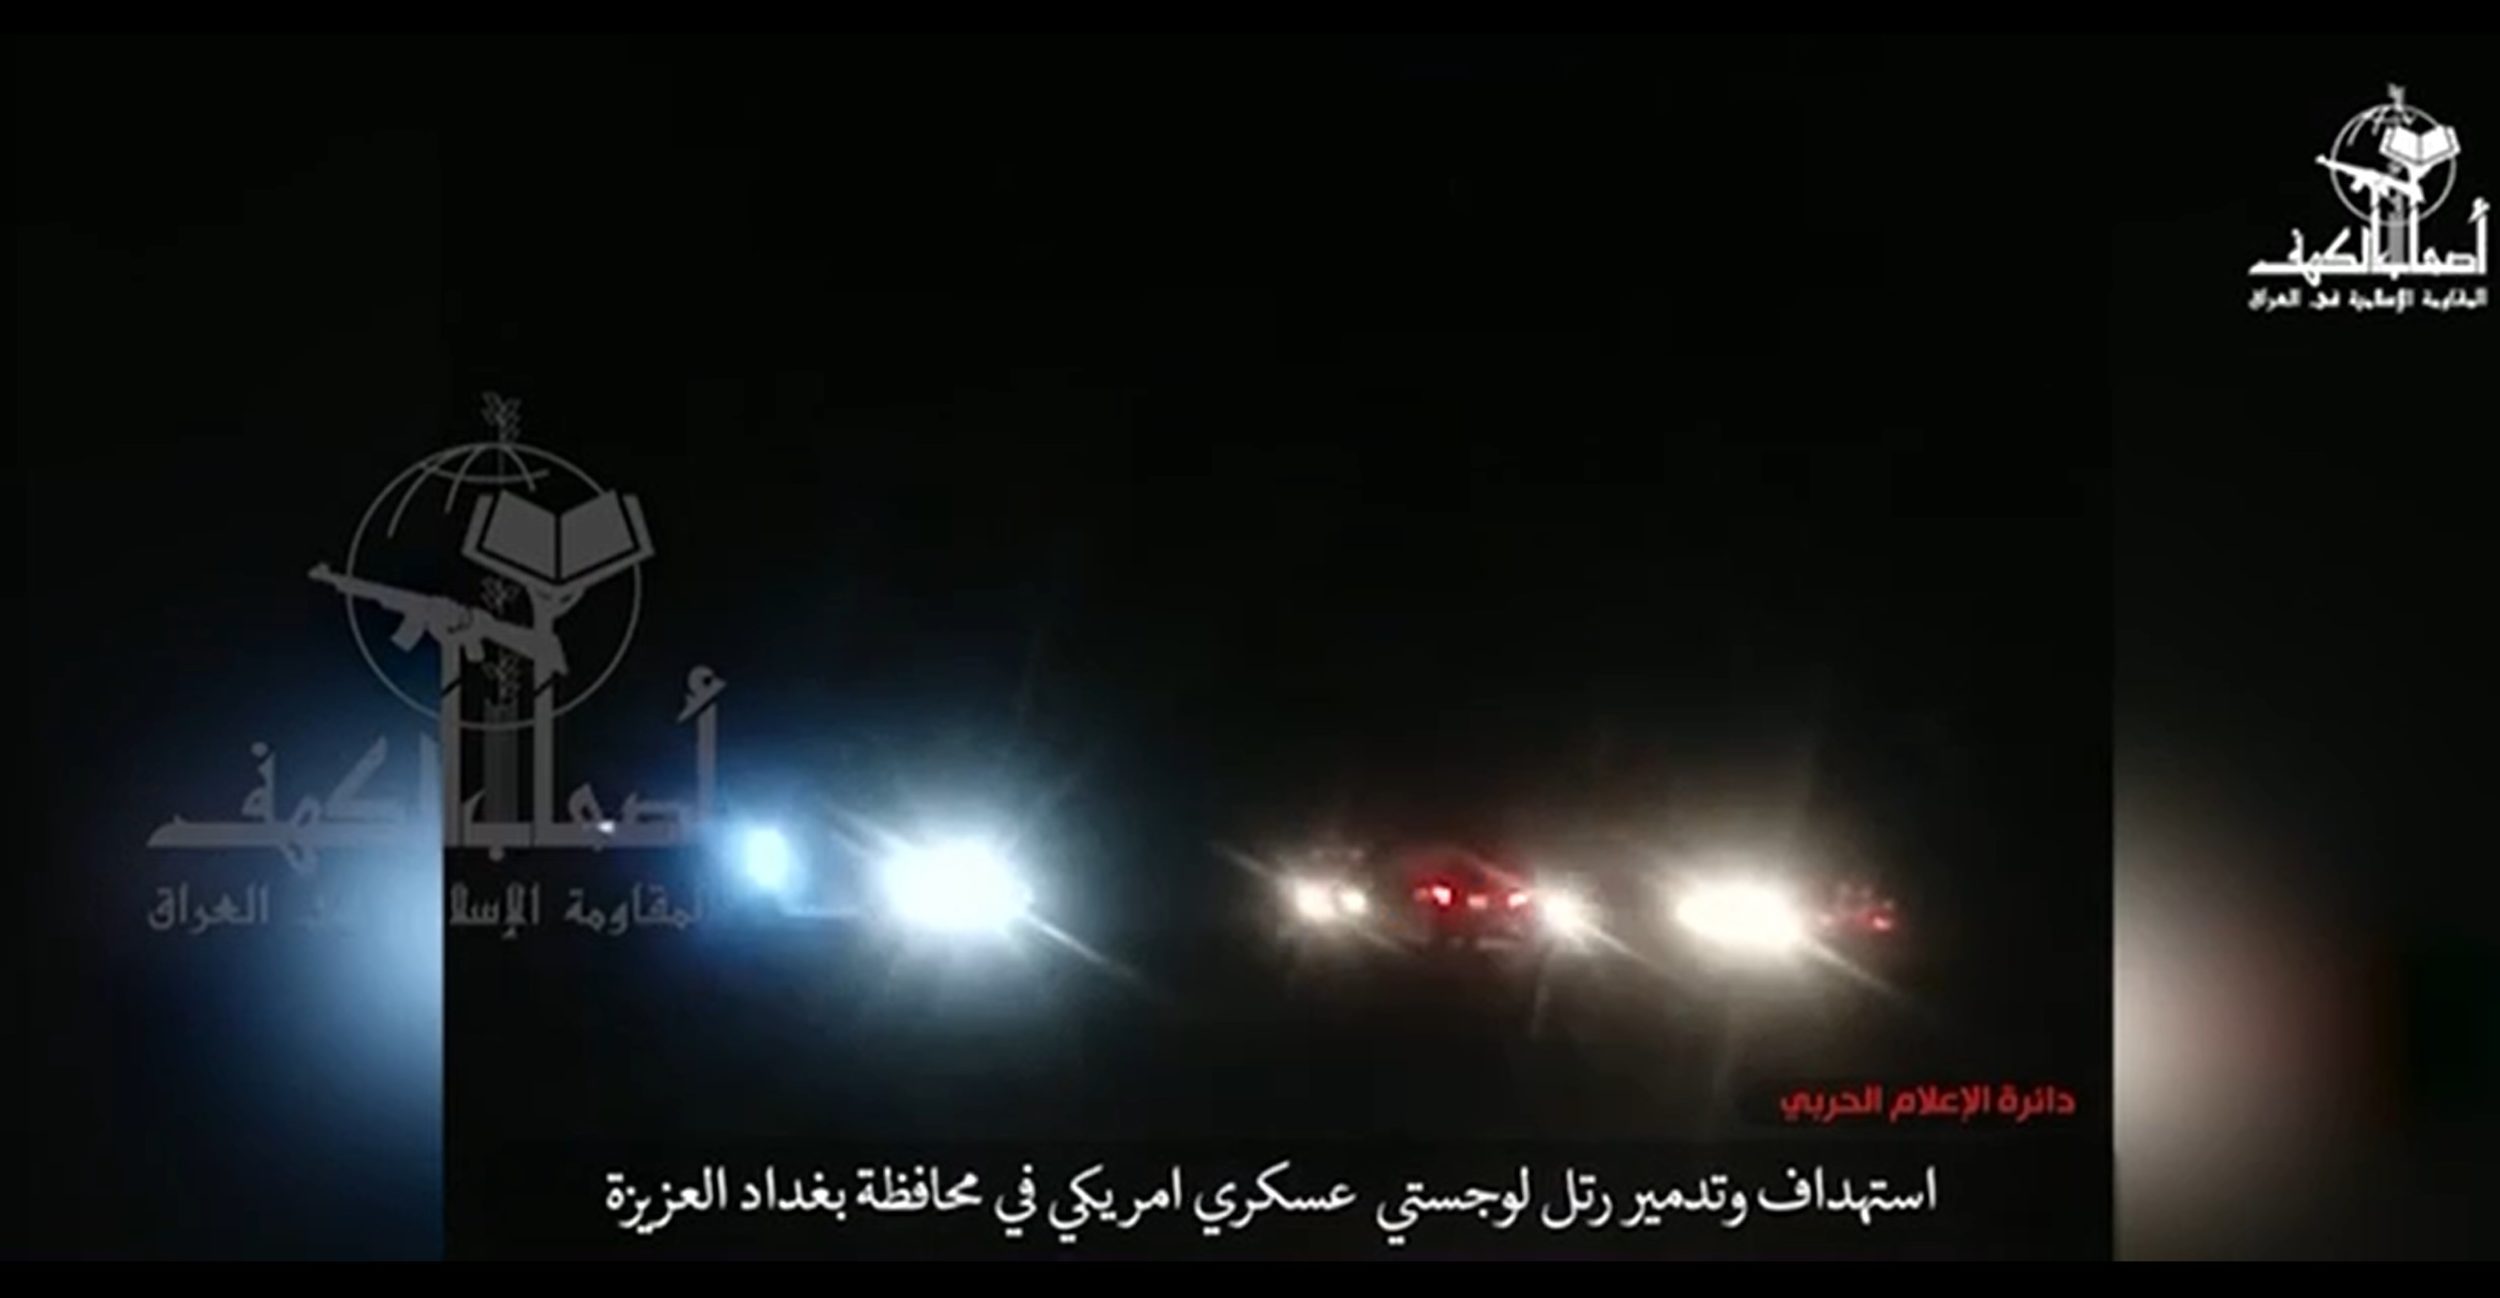 (Video) Ashab al-Kahf Targets and Destroys a United States' Logistics Convoy by an IED in Baghdad, Iraq - 13 April 2022